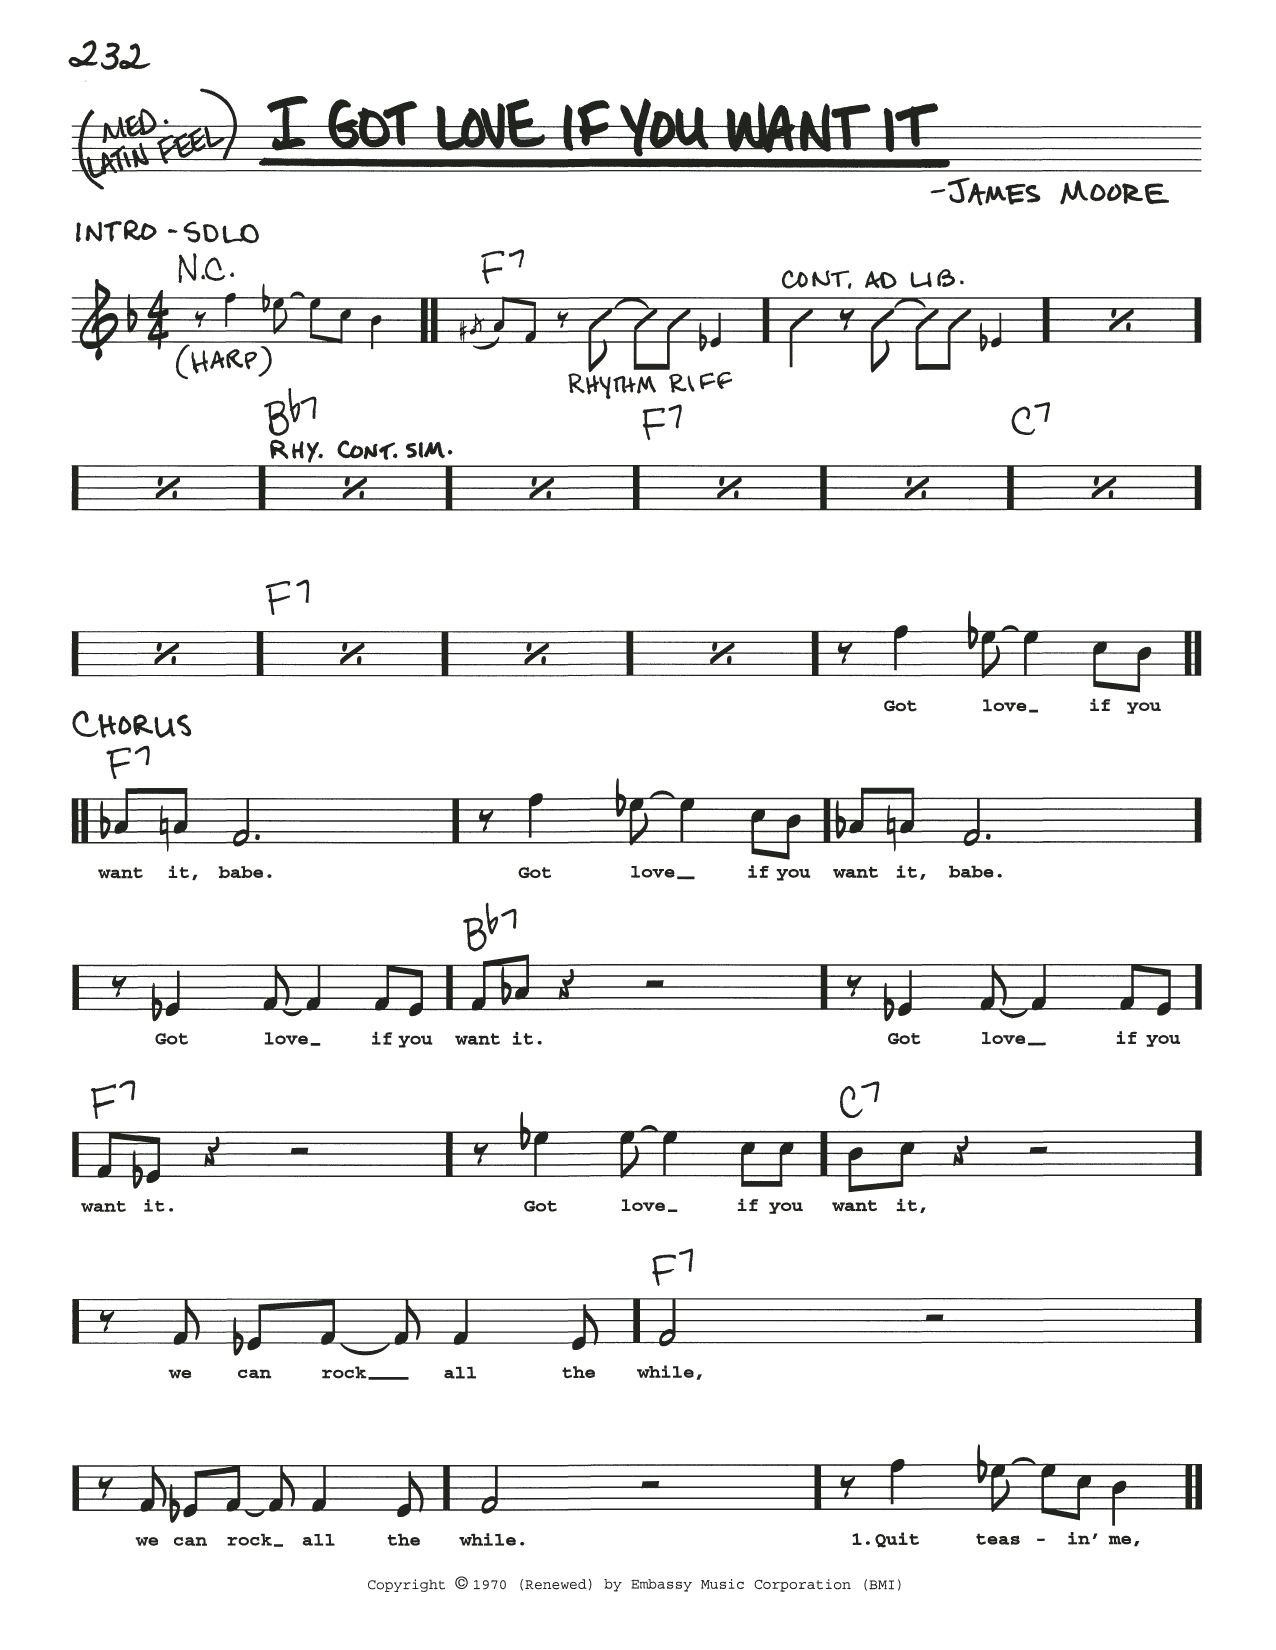 Download James Moore I Got Love If You Want It Sheet Music